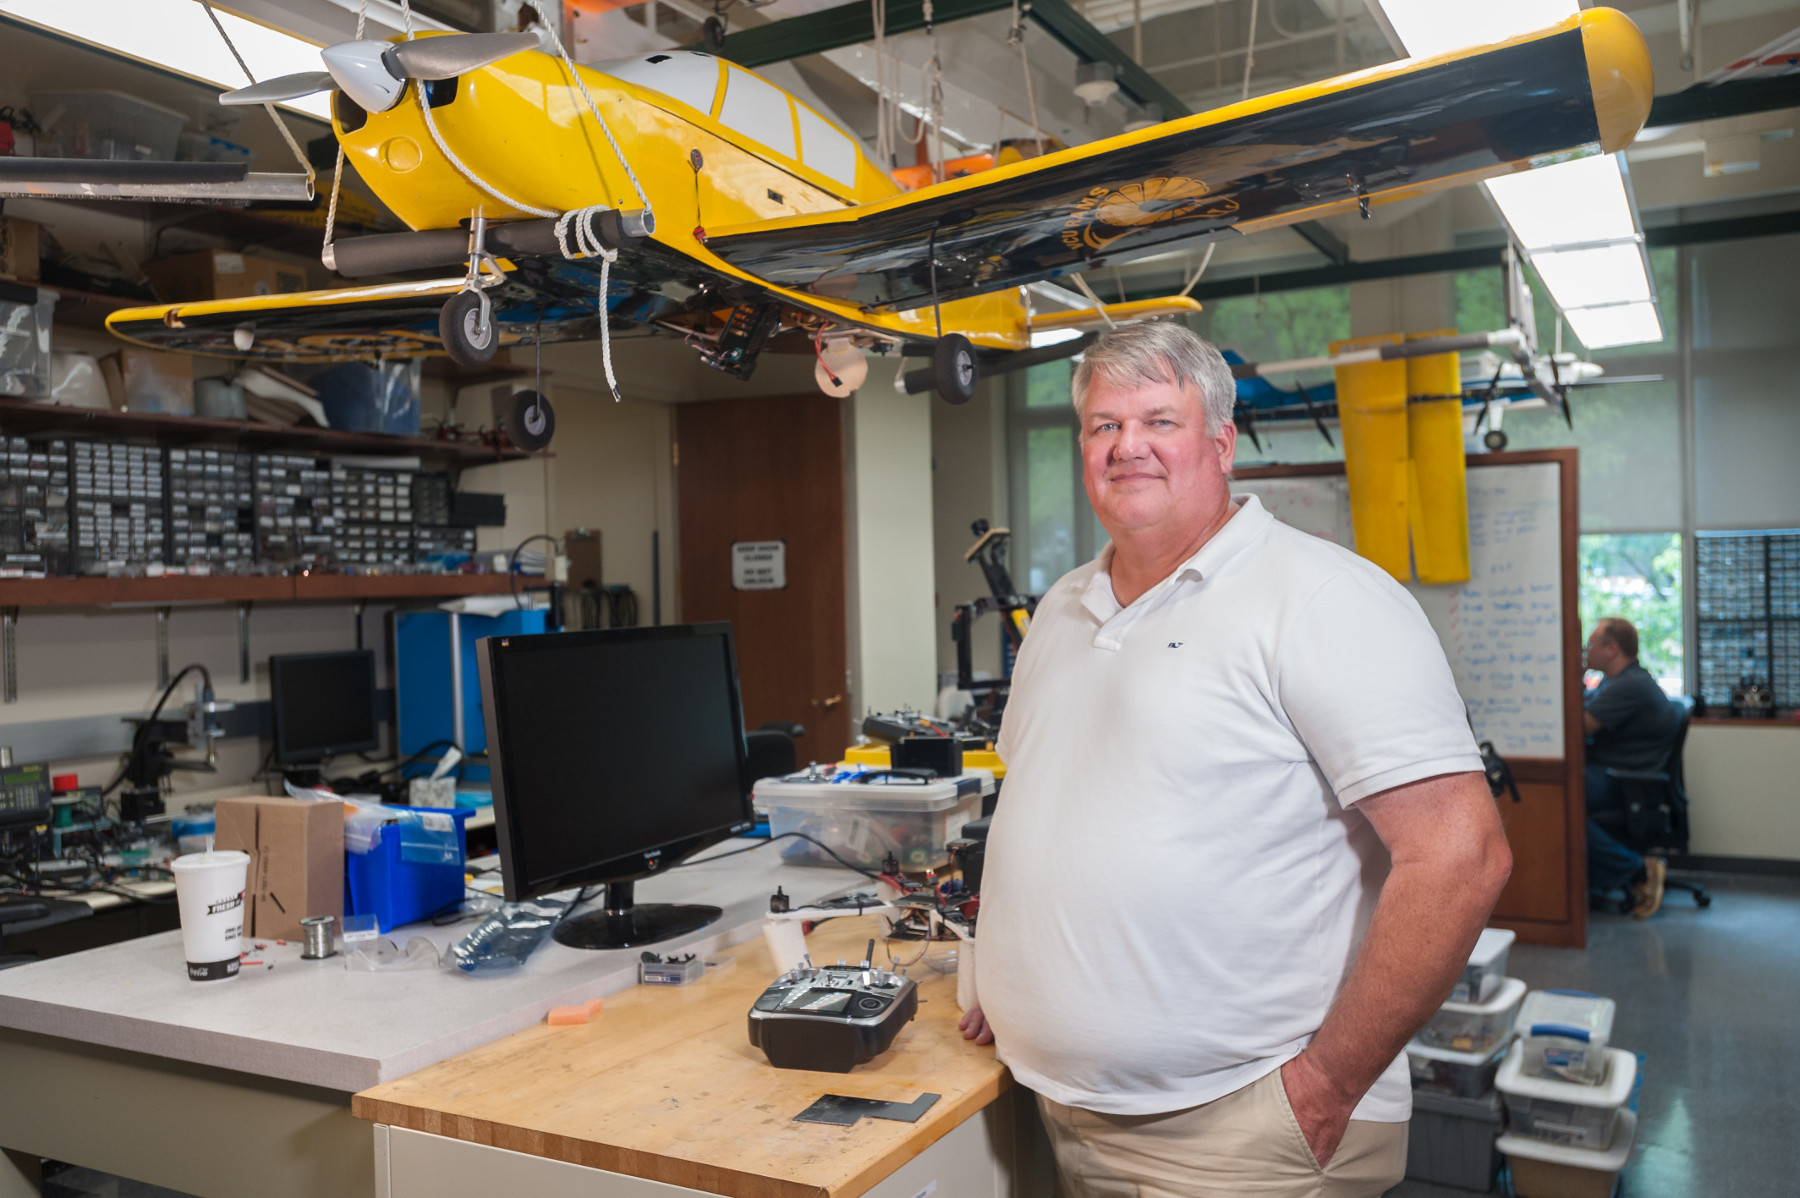 Professor standing in the UAV lab under a yellow drone.